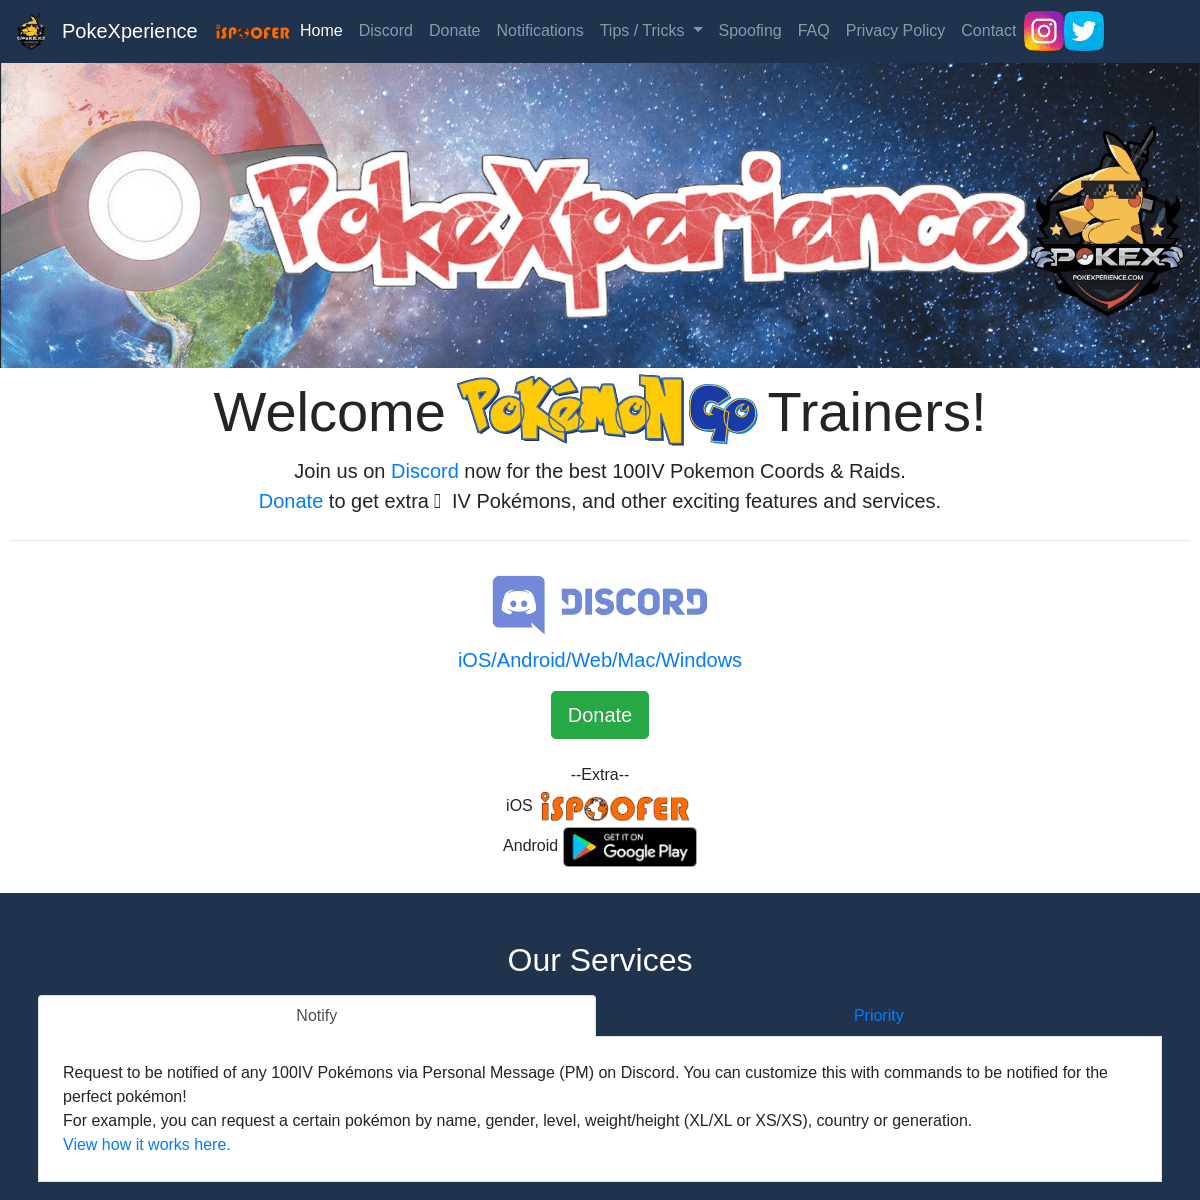 A complete backup of pokexperience.com